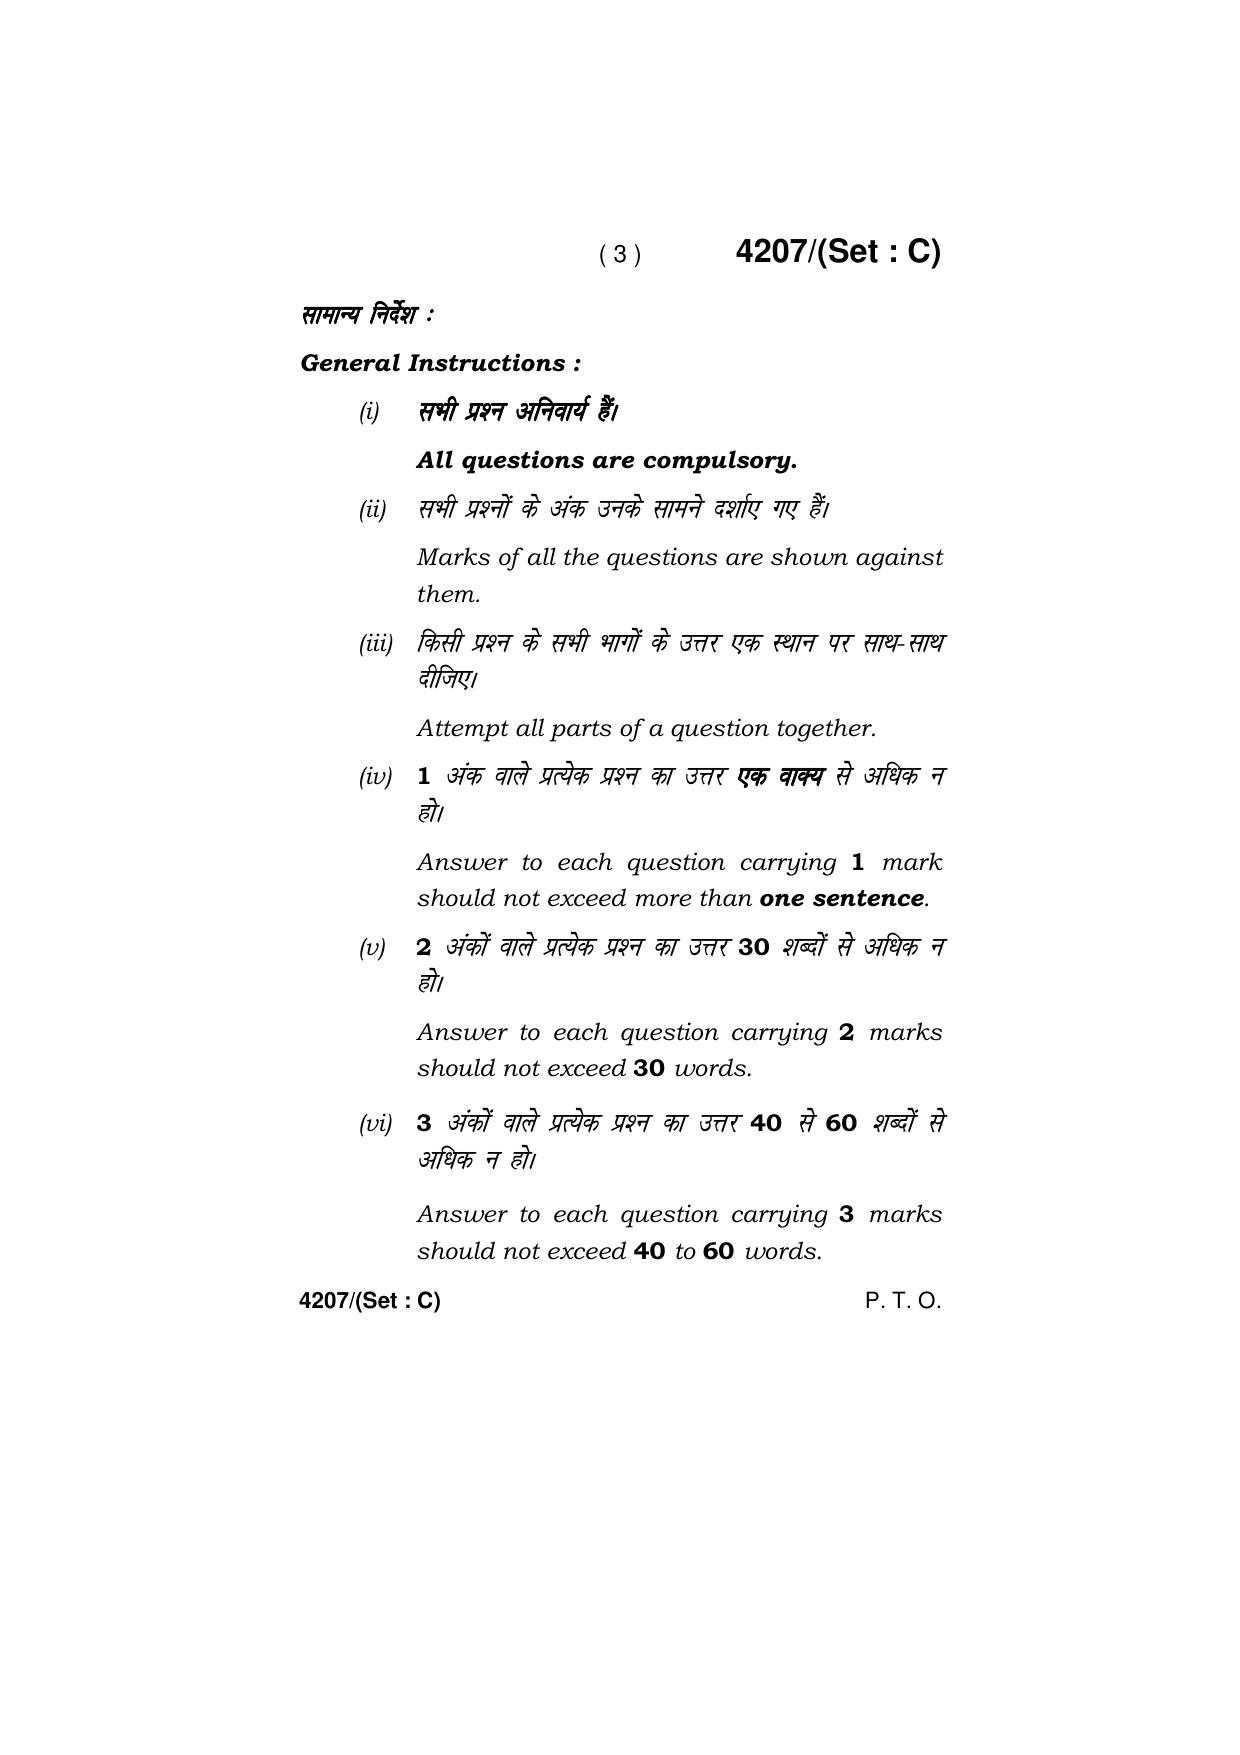 Haryana Board HBSE Class 10 Social Science (All Set) 2019 Question Paper - Page 33